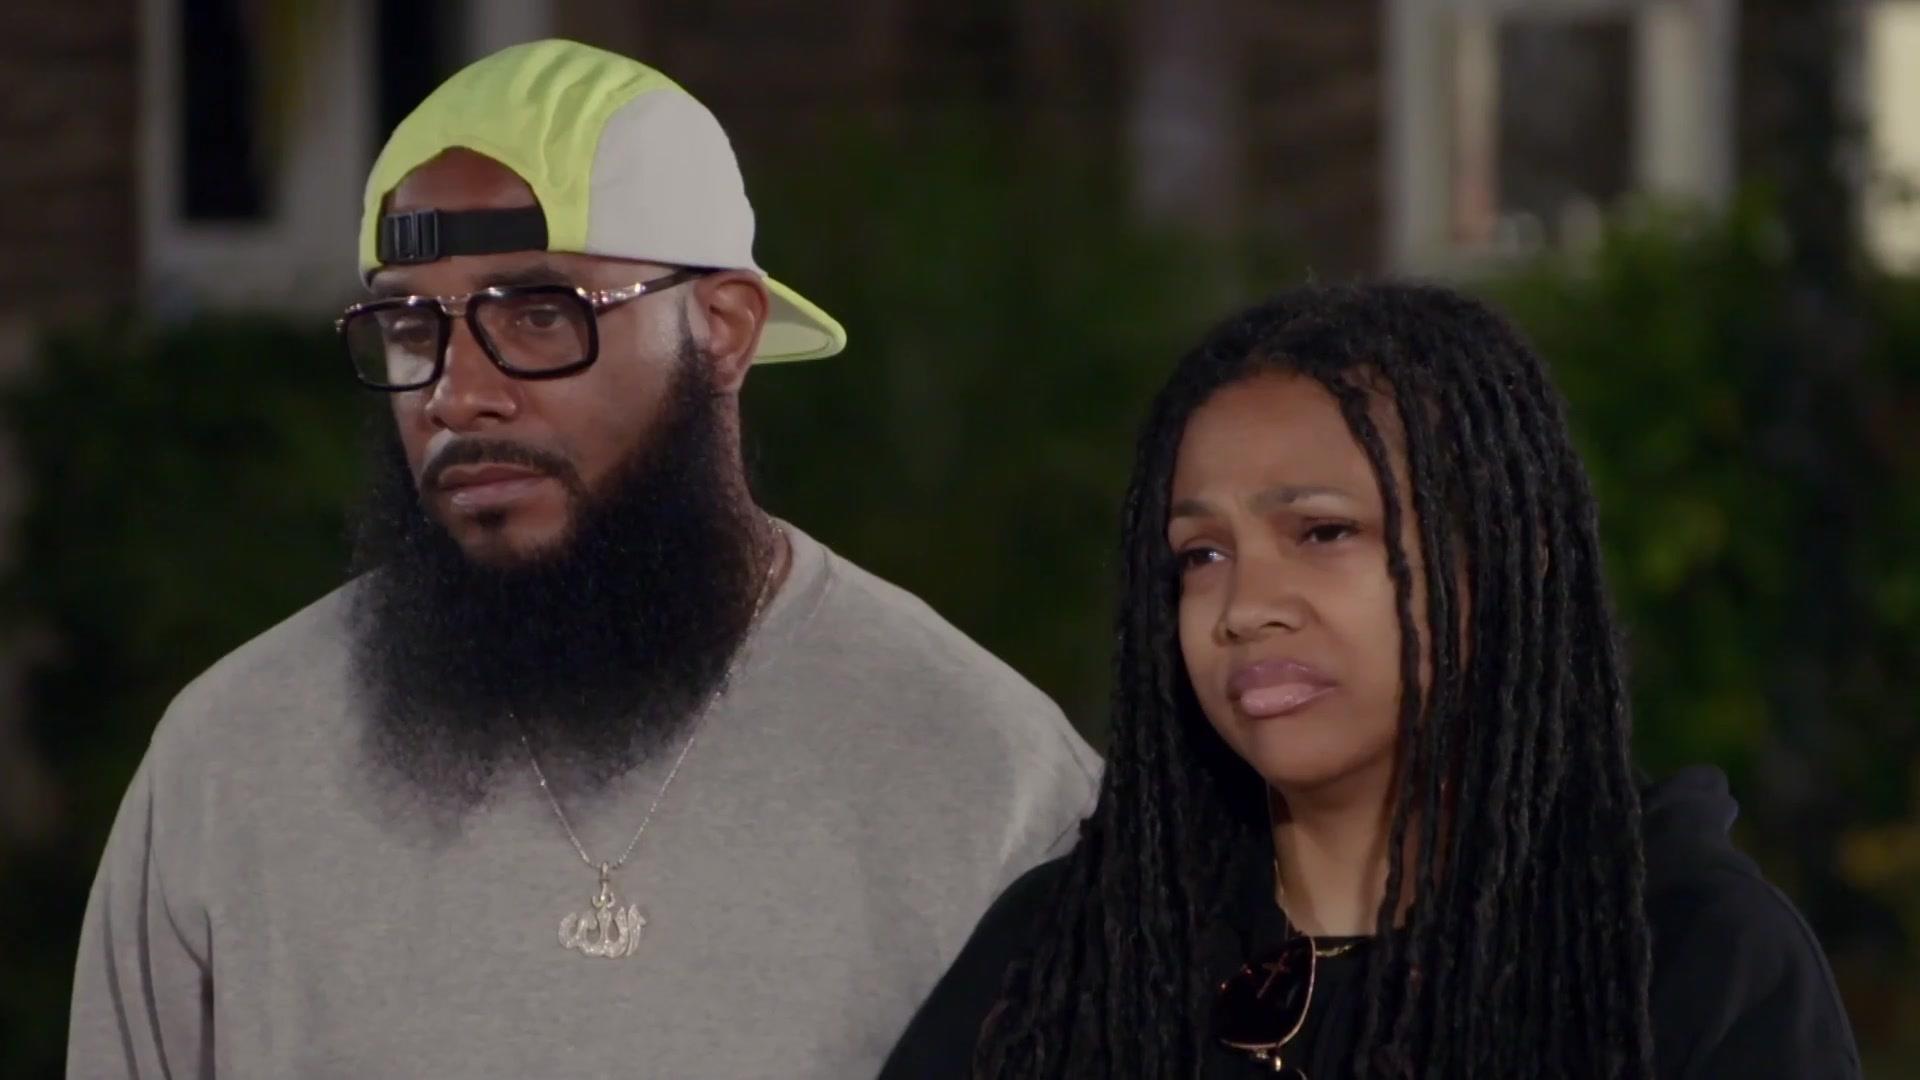 Watch Sneak Peek: #HipHopBootCamp Hits Another Level! | Marriage Boot Camp: Hip Hop Edition Video Extras